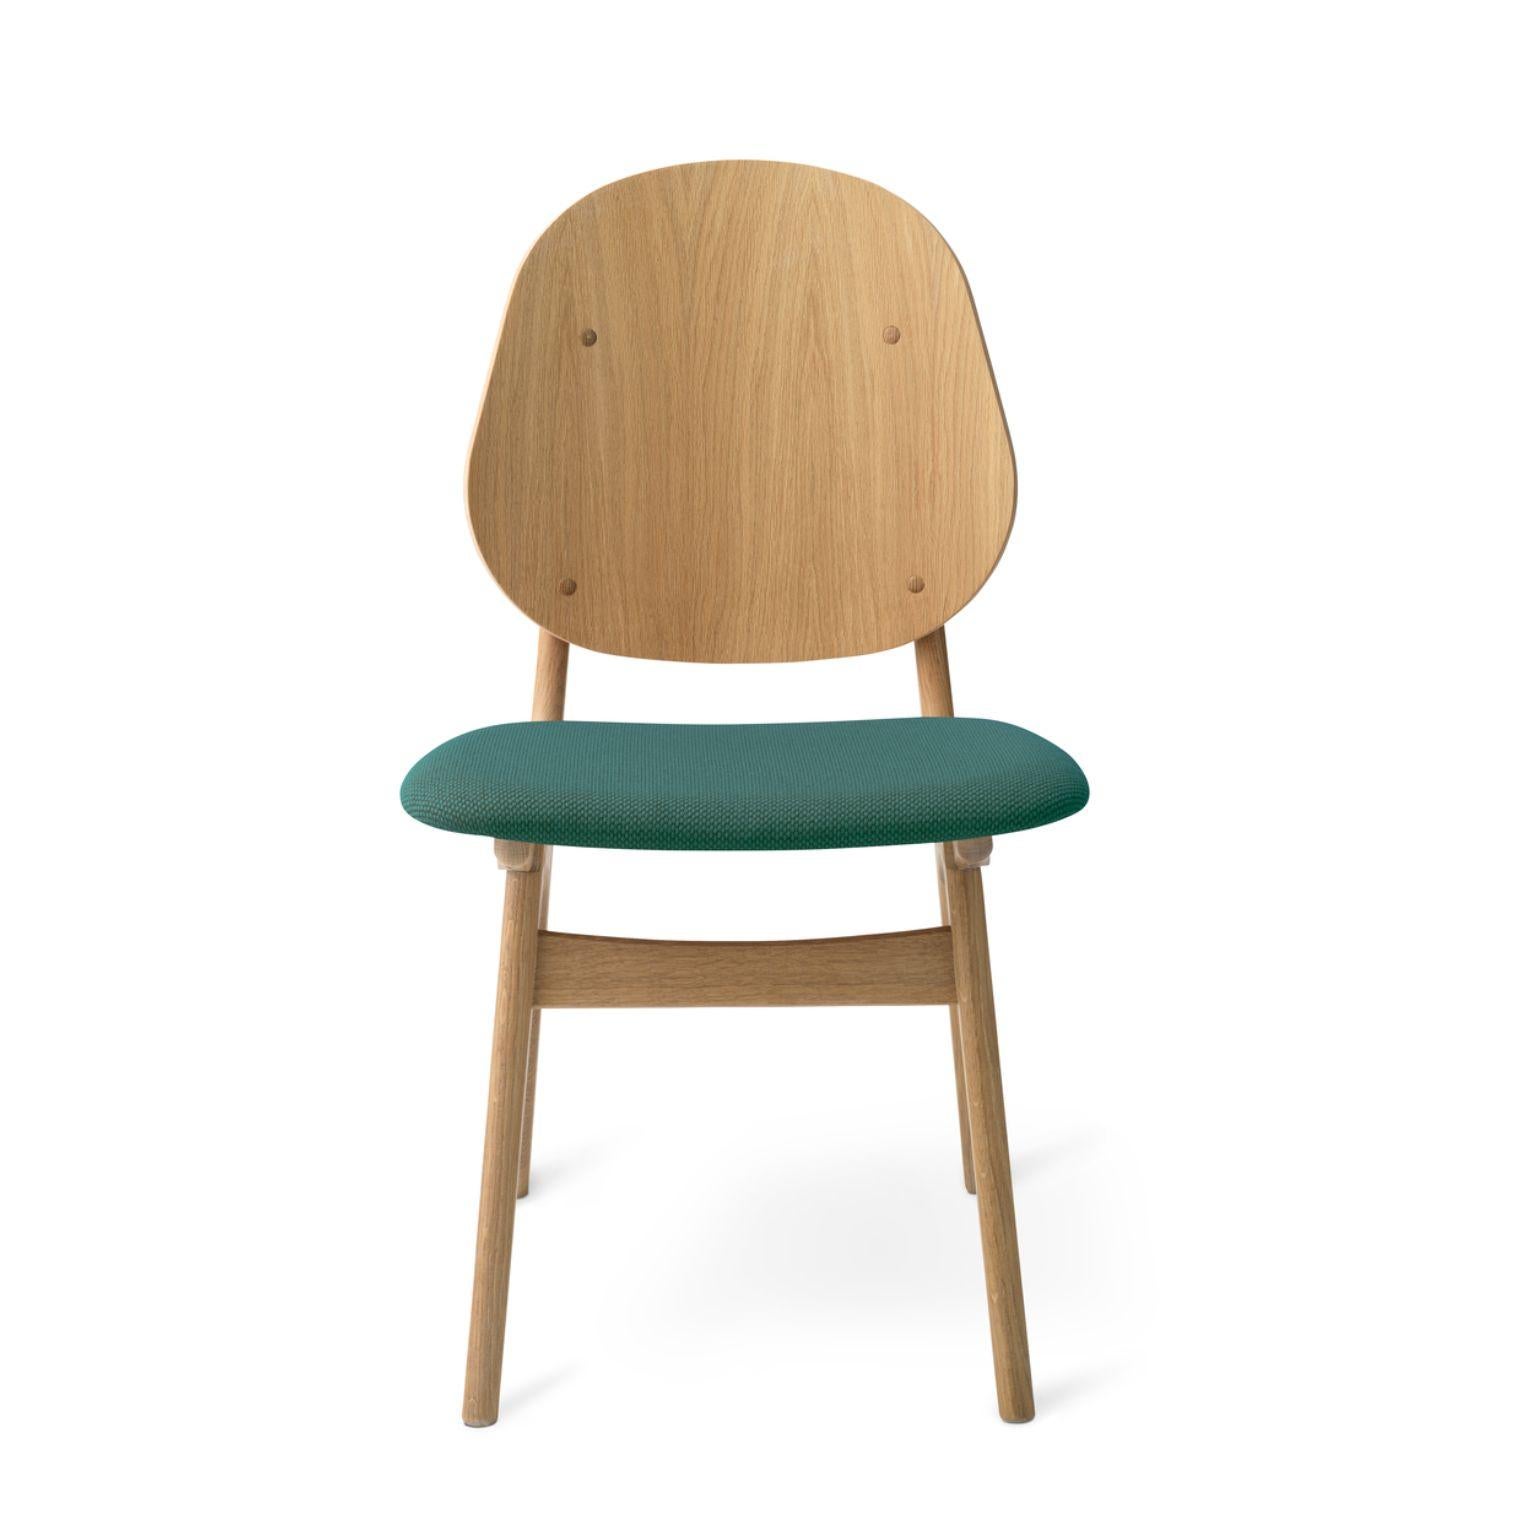 Noble Chair White Oiled Oak Dark Cyan by Warm Nordic
Dimensions: D55 x W47 x H 85 cm
Material: White oiled solid oak, Veneer seat and back, Textile upholstery.
Weight: 7.5 kg
Also available in different colours and finishes. Please contact